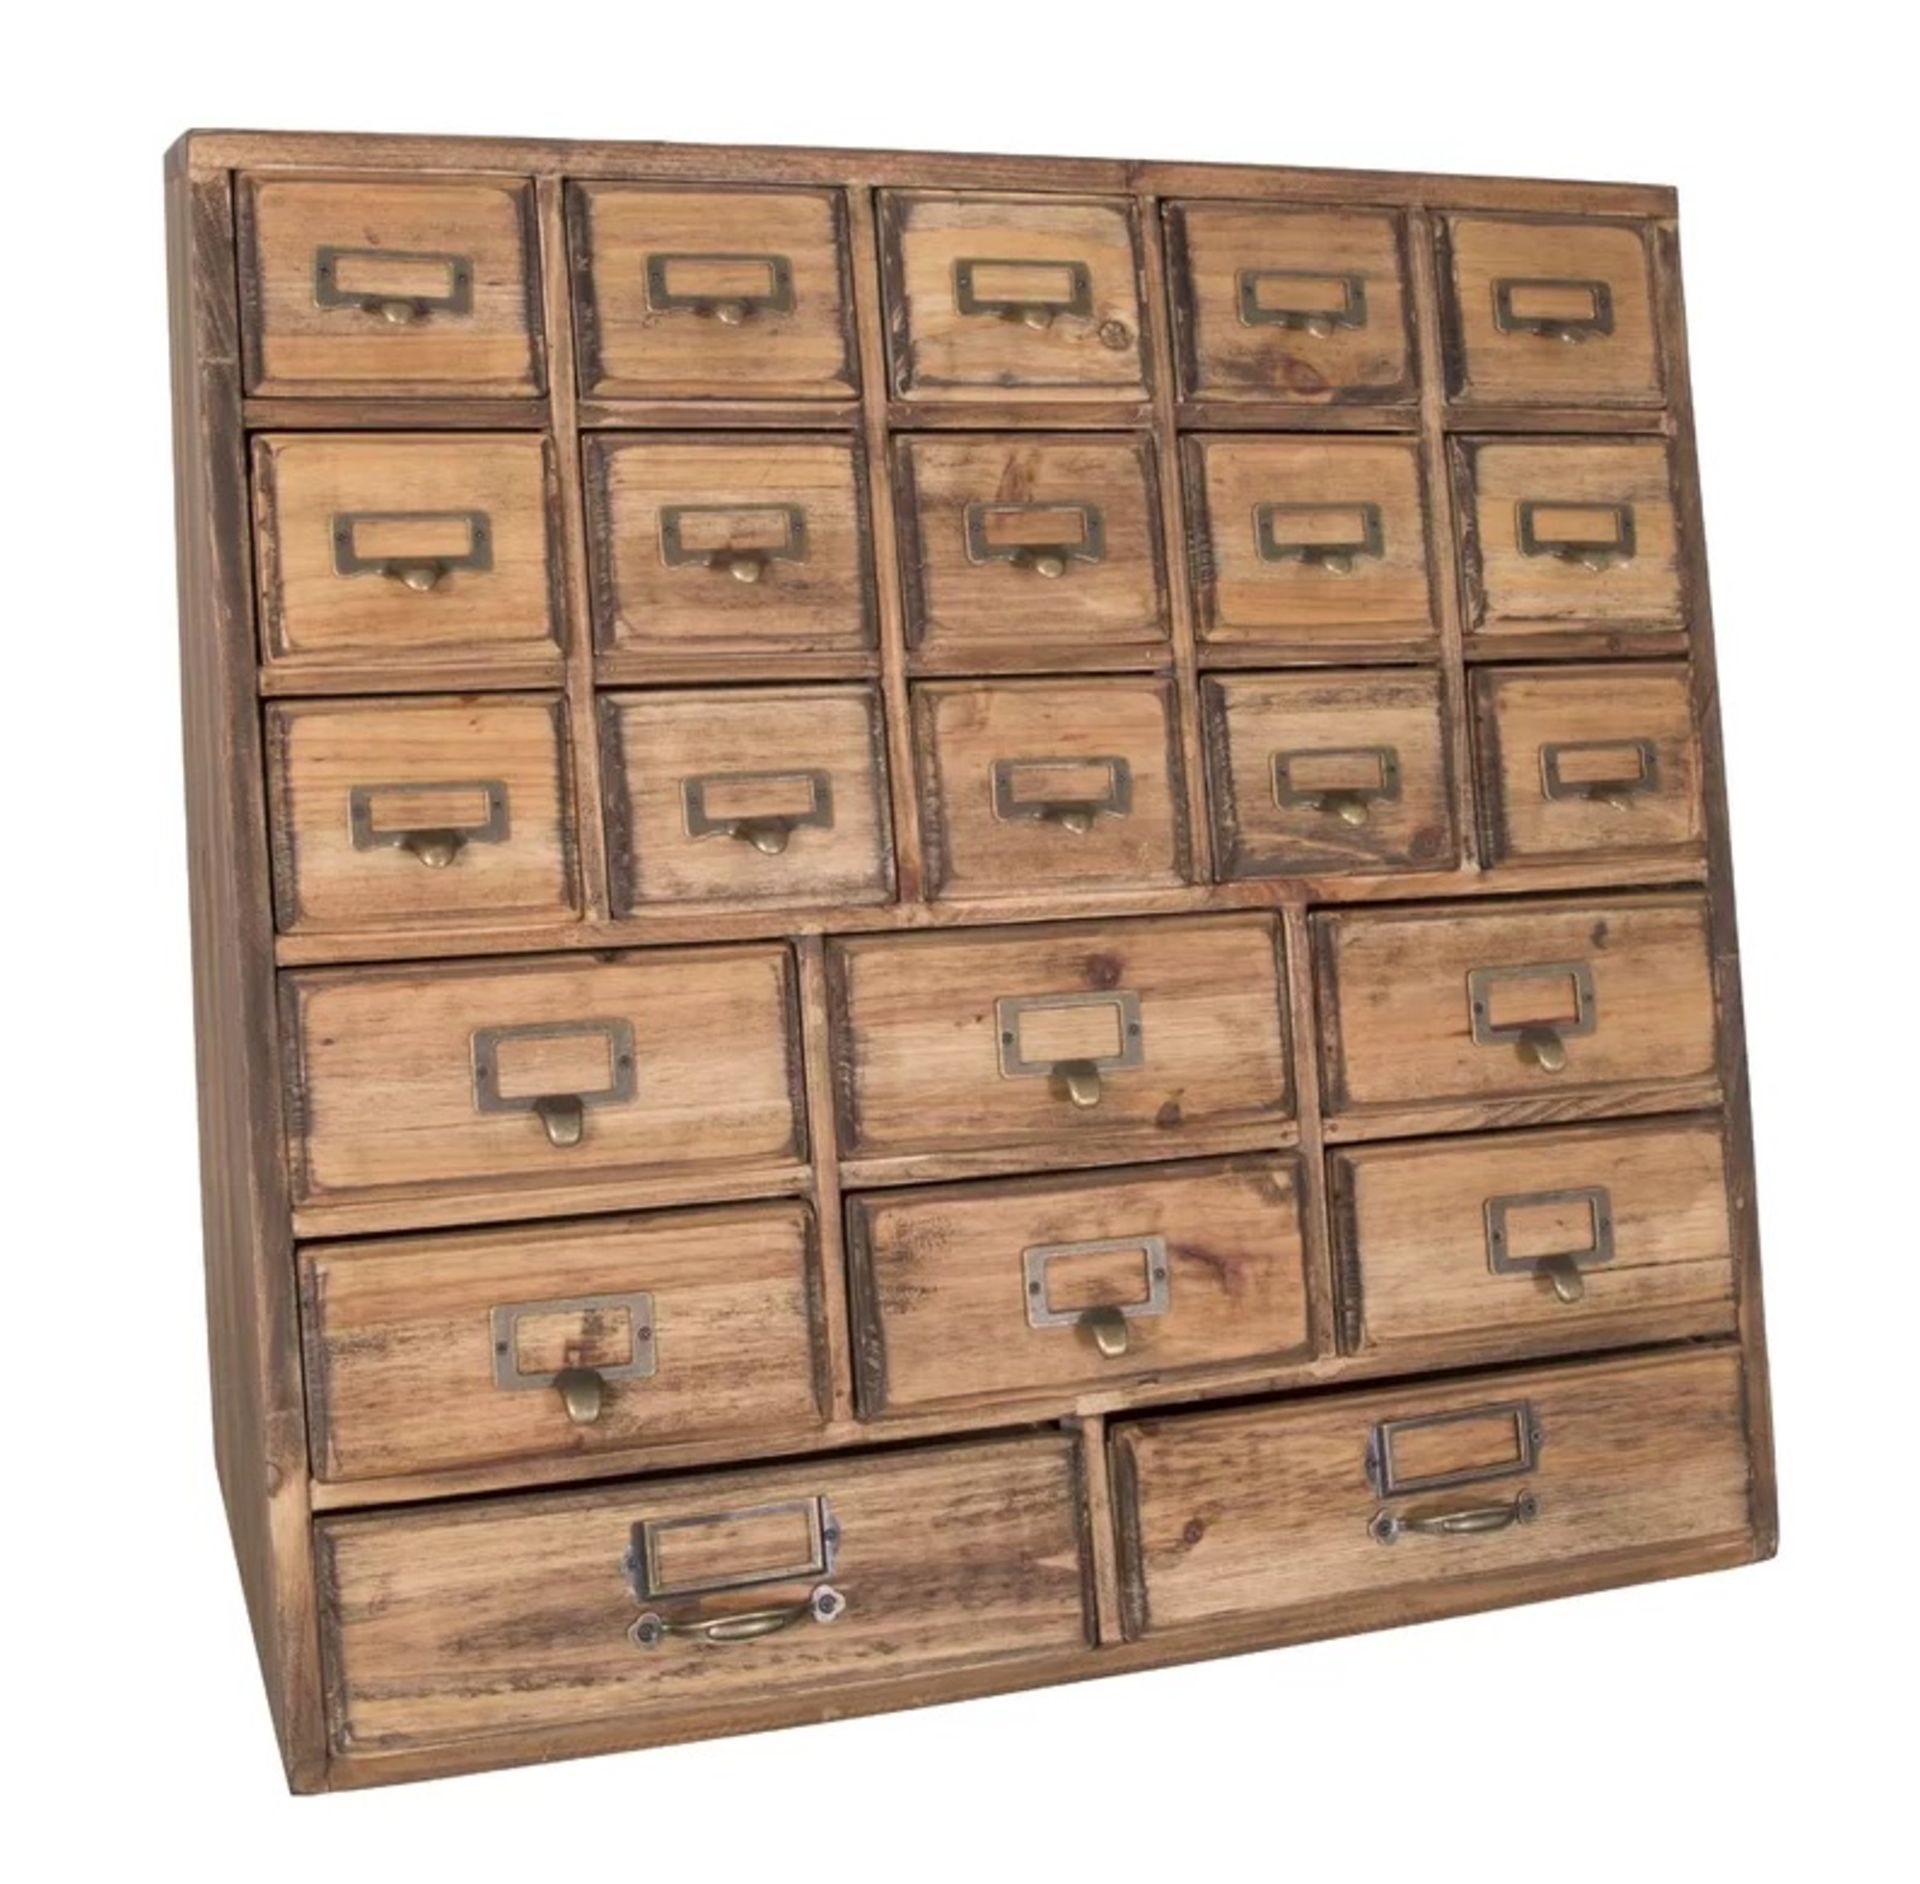 Inspired 23 Drawer Chest Create An Inspired Space Reminiscent Of Open Warehouses And Time-Worn